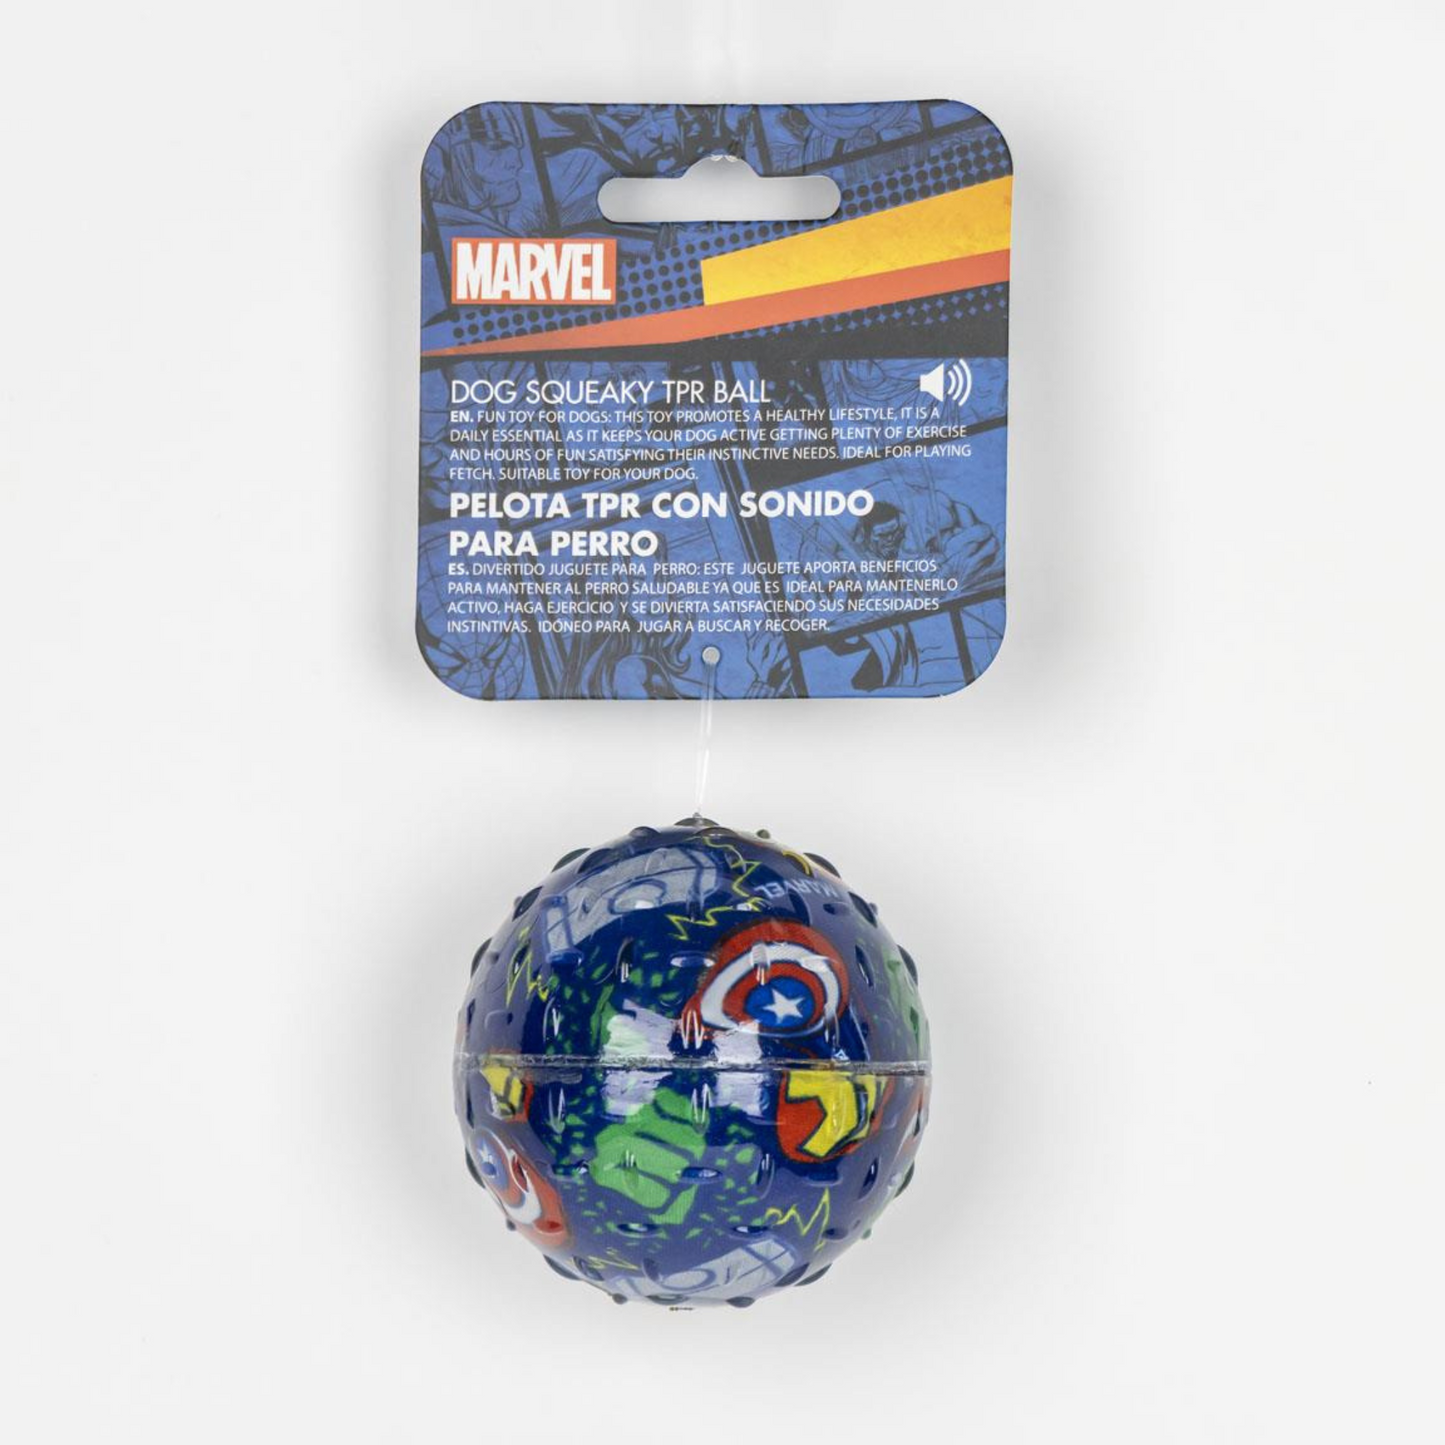 Marvel Avengers Squeaky Dog Ball Toy